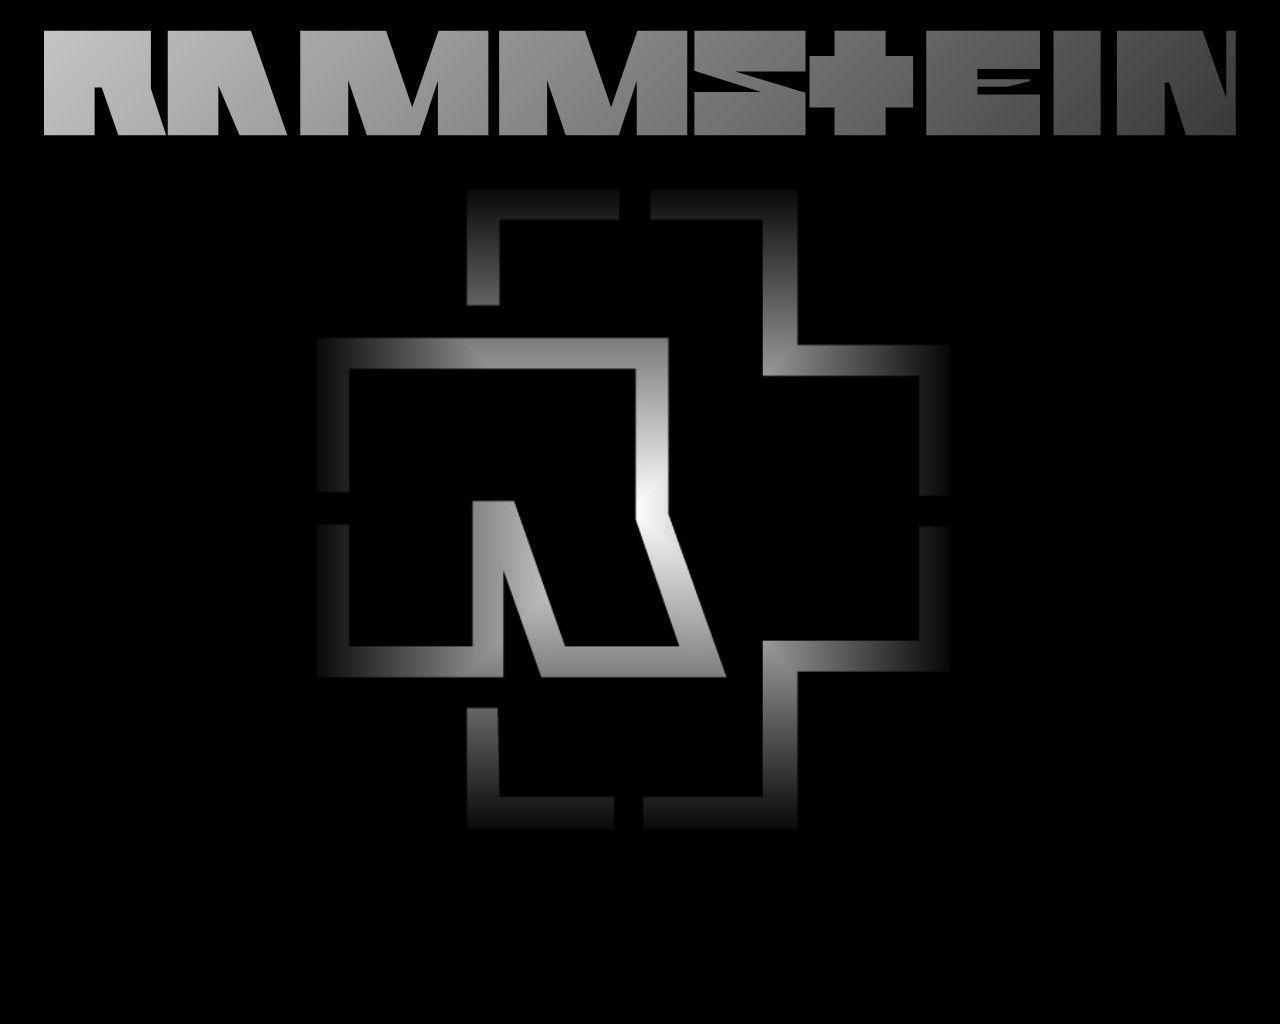 Rammstein Wallpapers 4 by Ozzyhelter